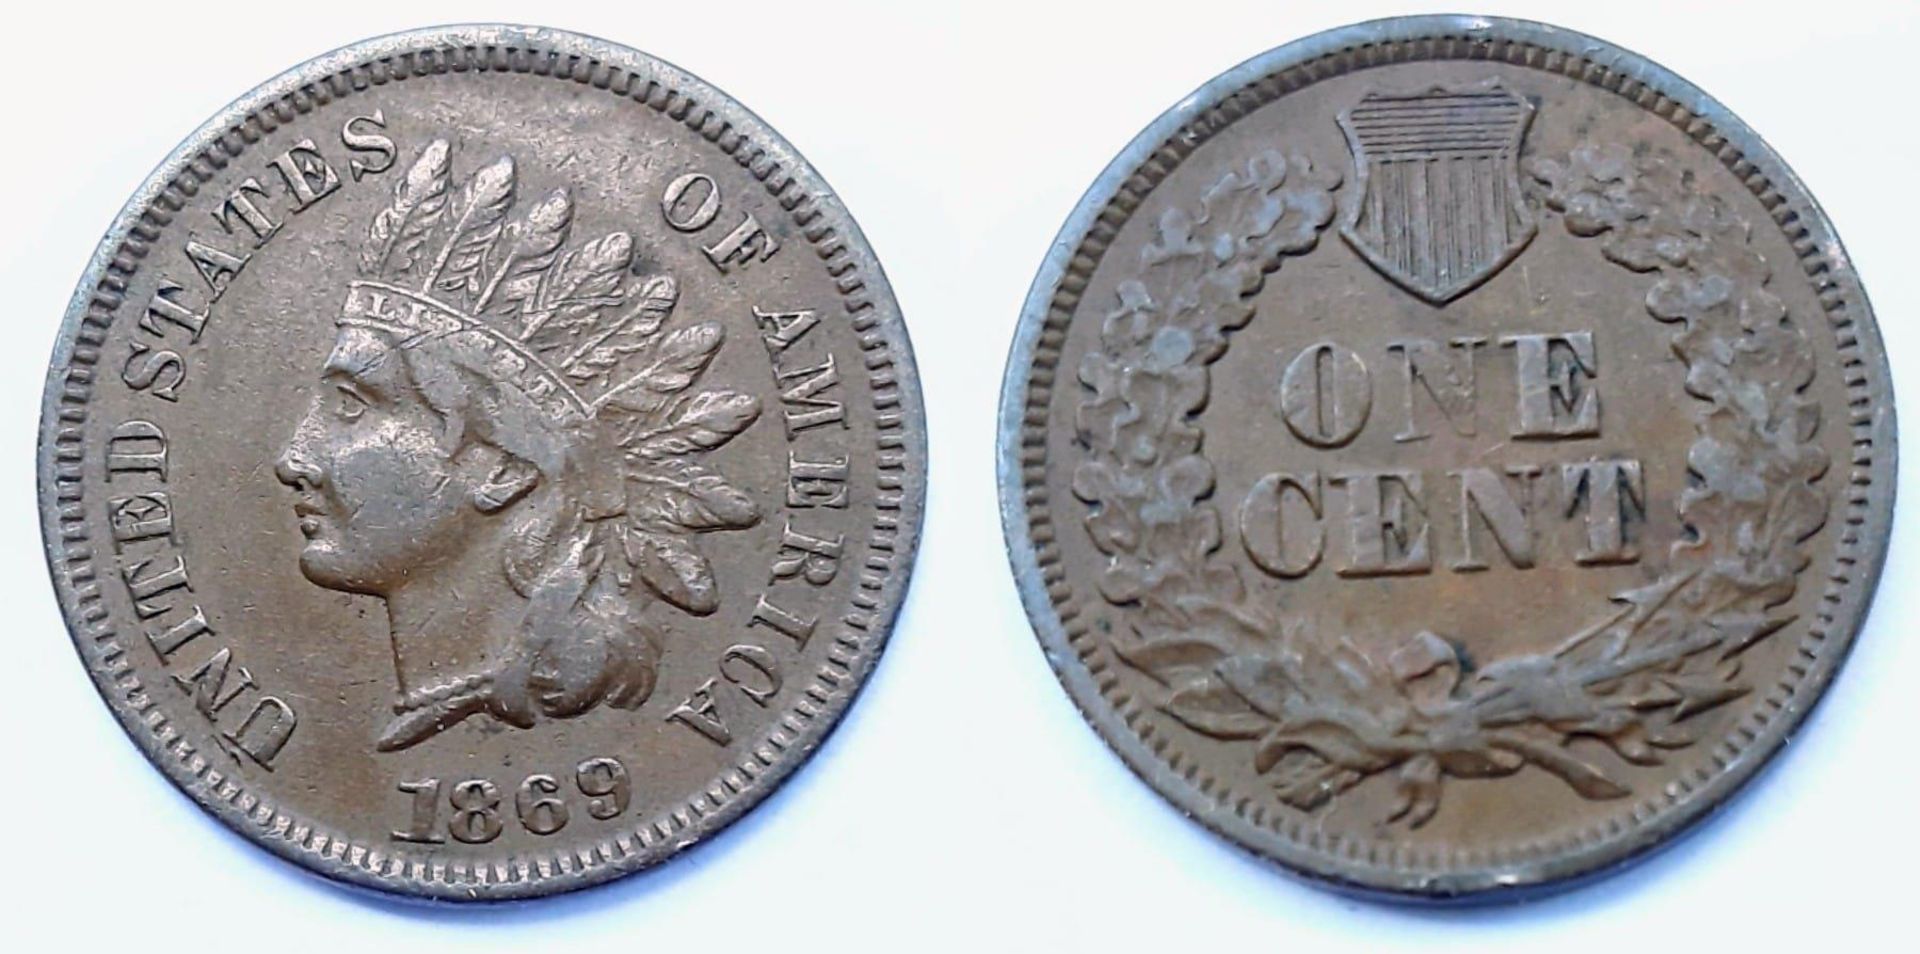 A Rare 1869 USA One Cent Indian Head Coin. Please see photos for conditions.